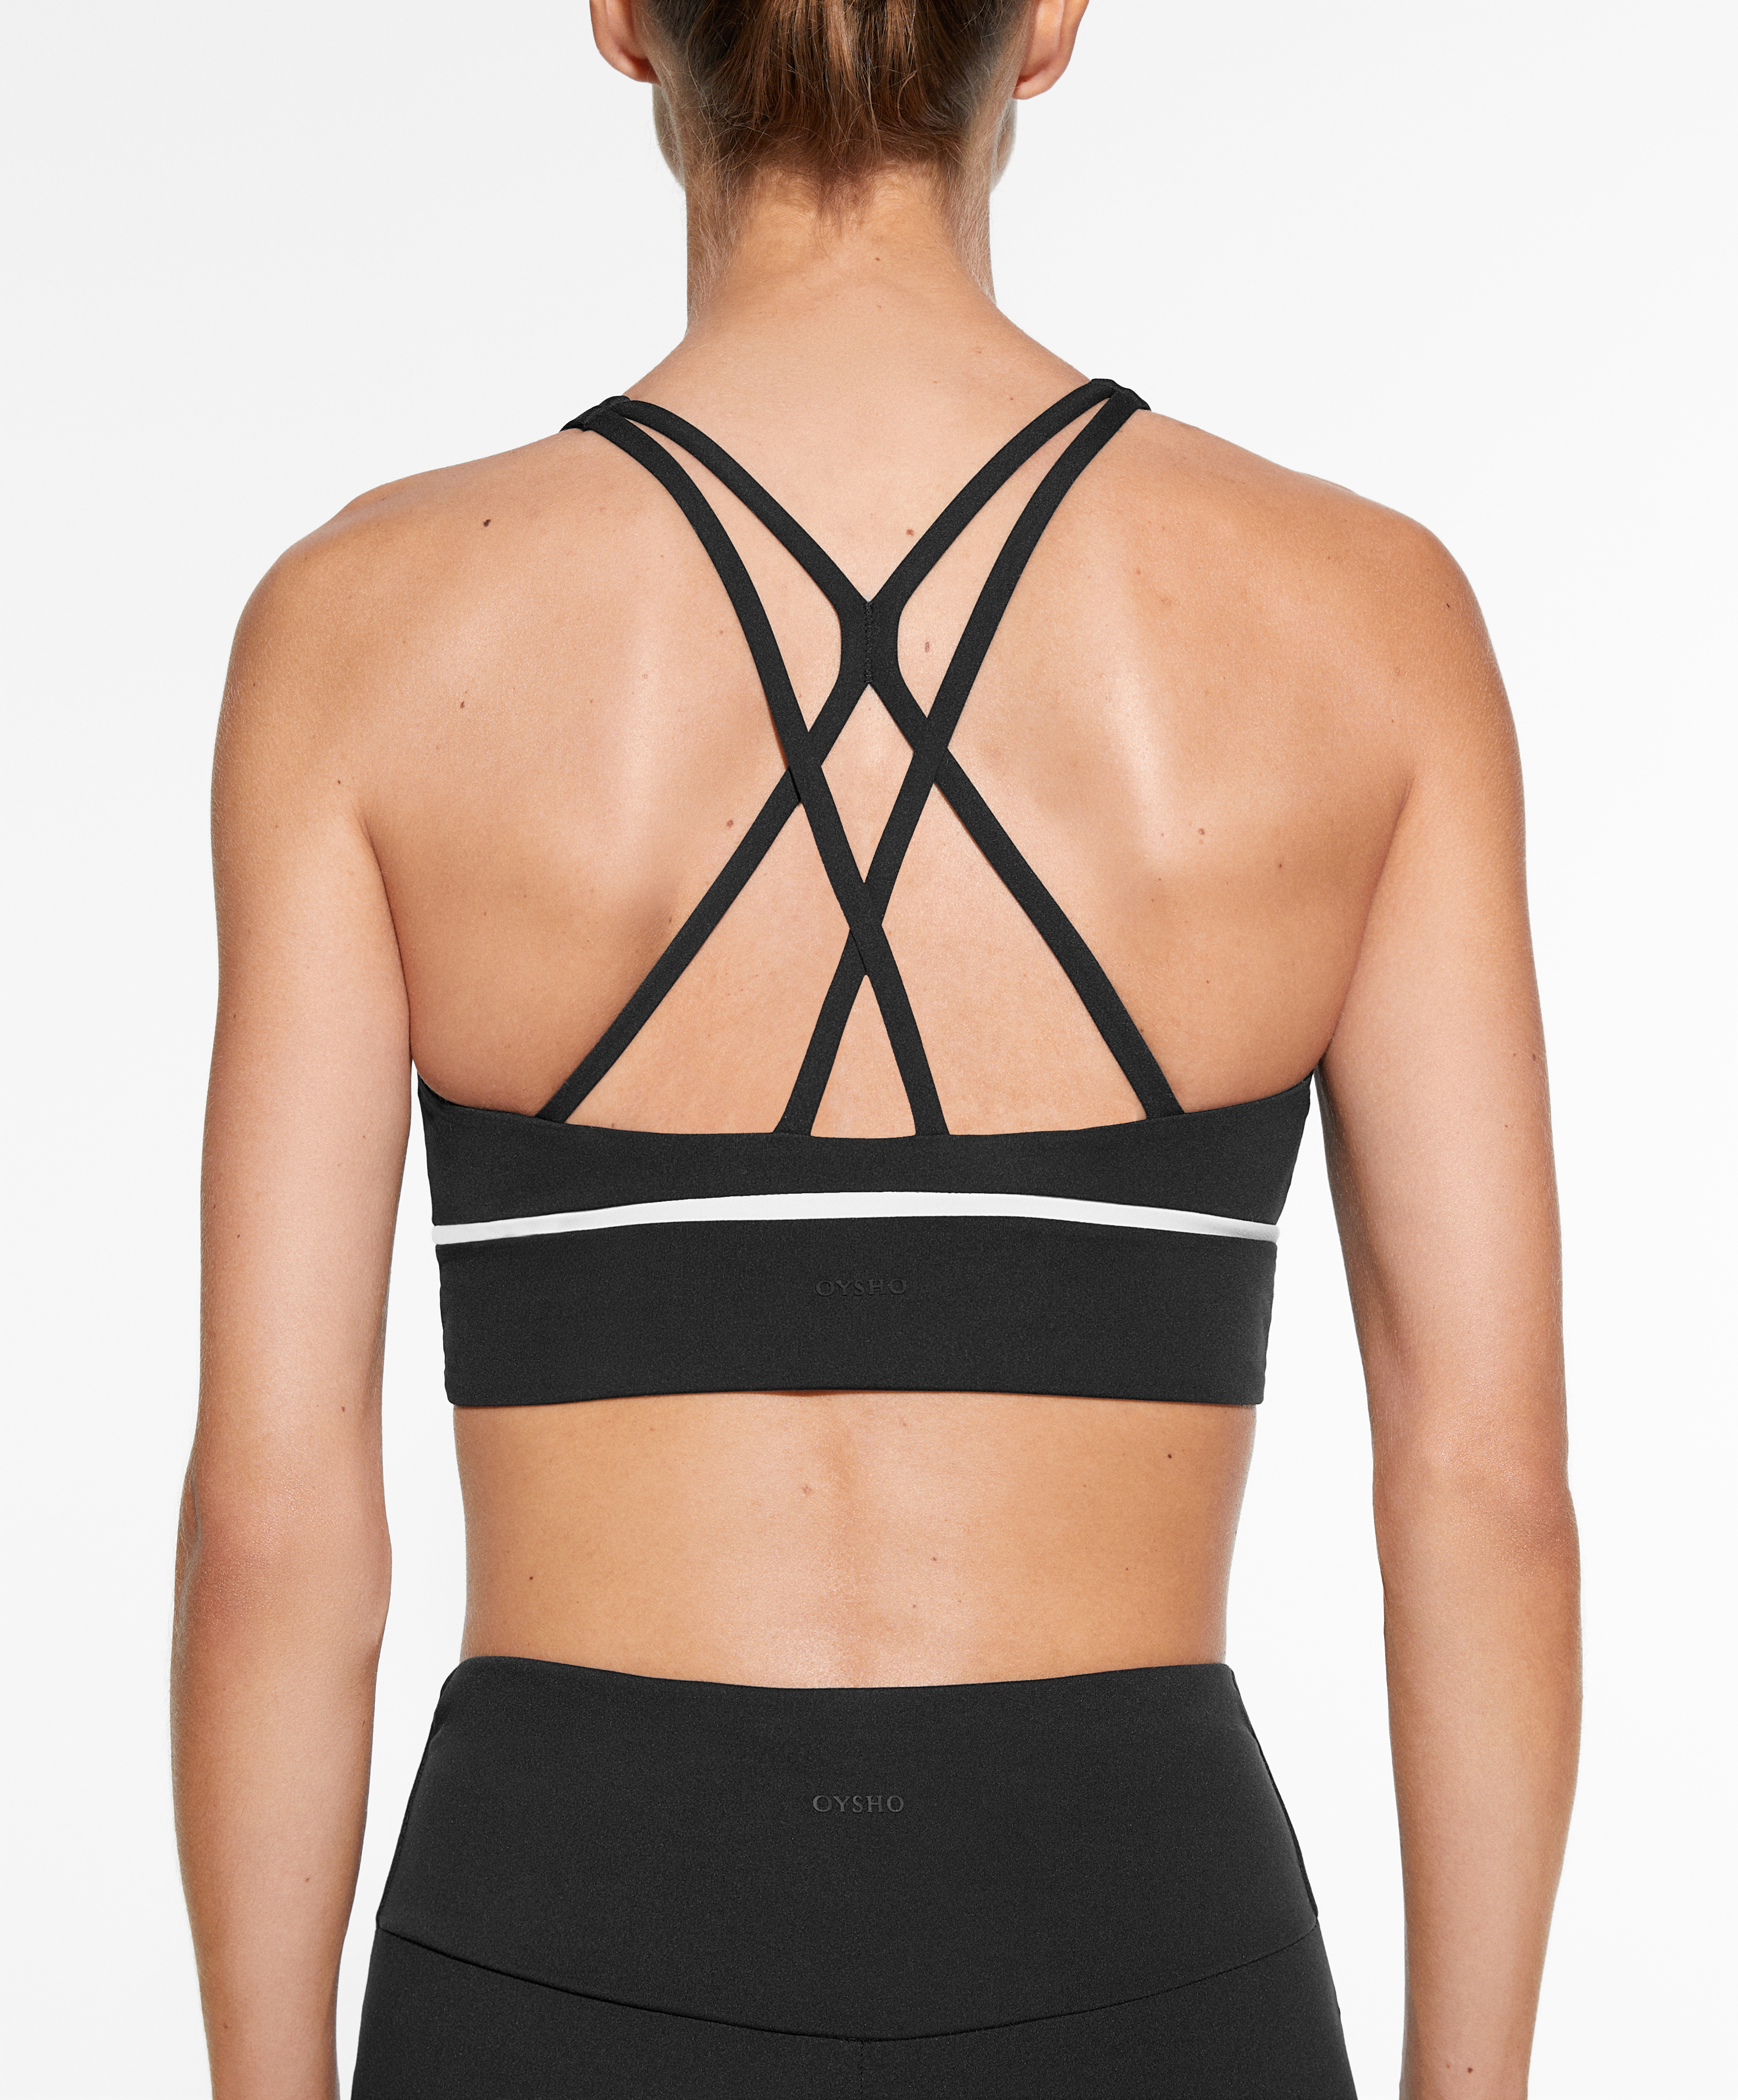 Medium-support sports bra with cups and piping